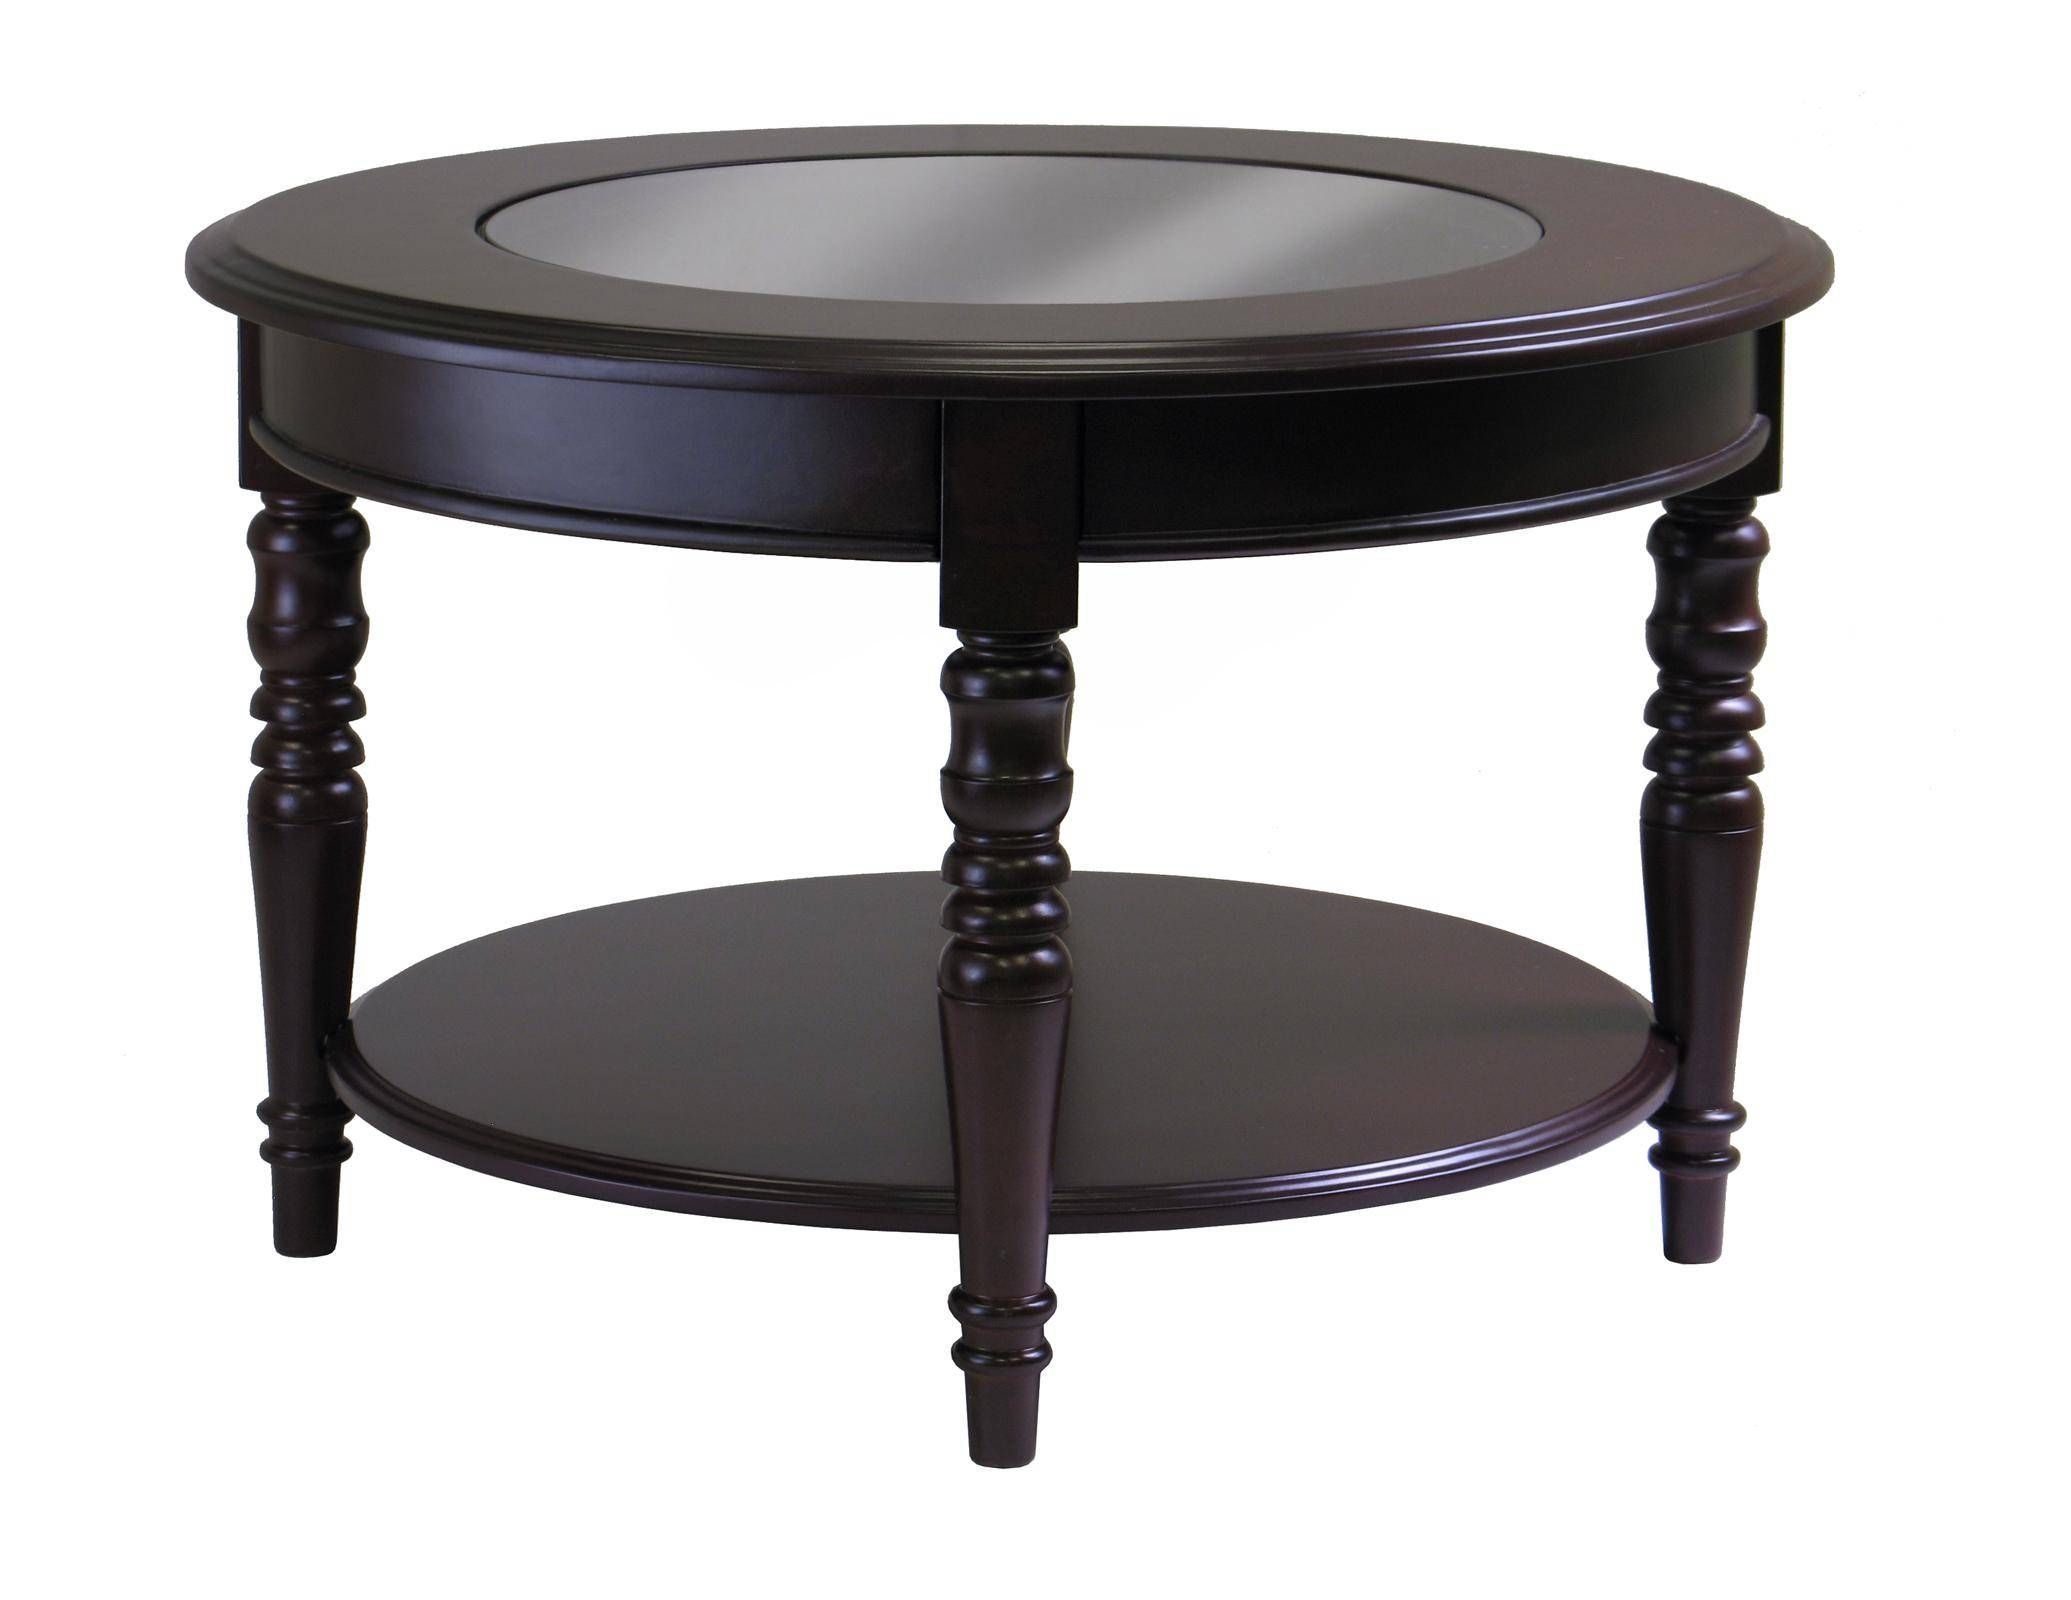 Round Wood Coffee Table With Glass Top Intended For Dark Wood Coffee Tables With Glass Top (View 21 of 30)